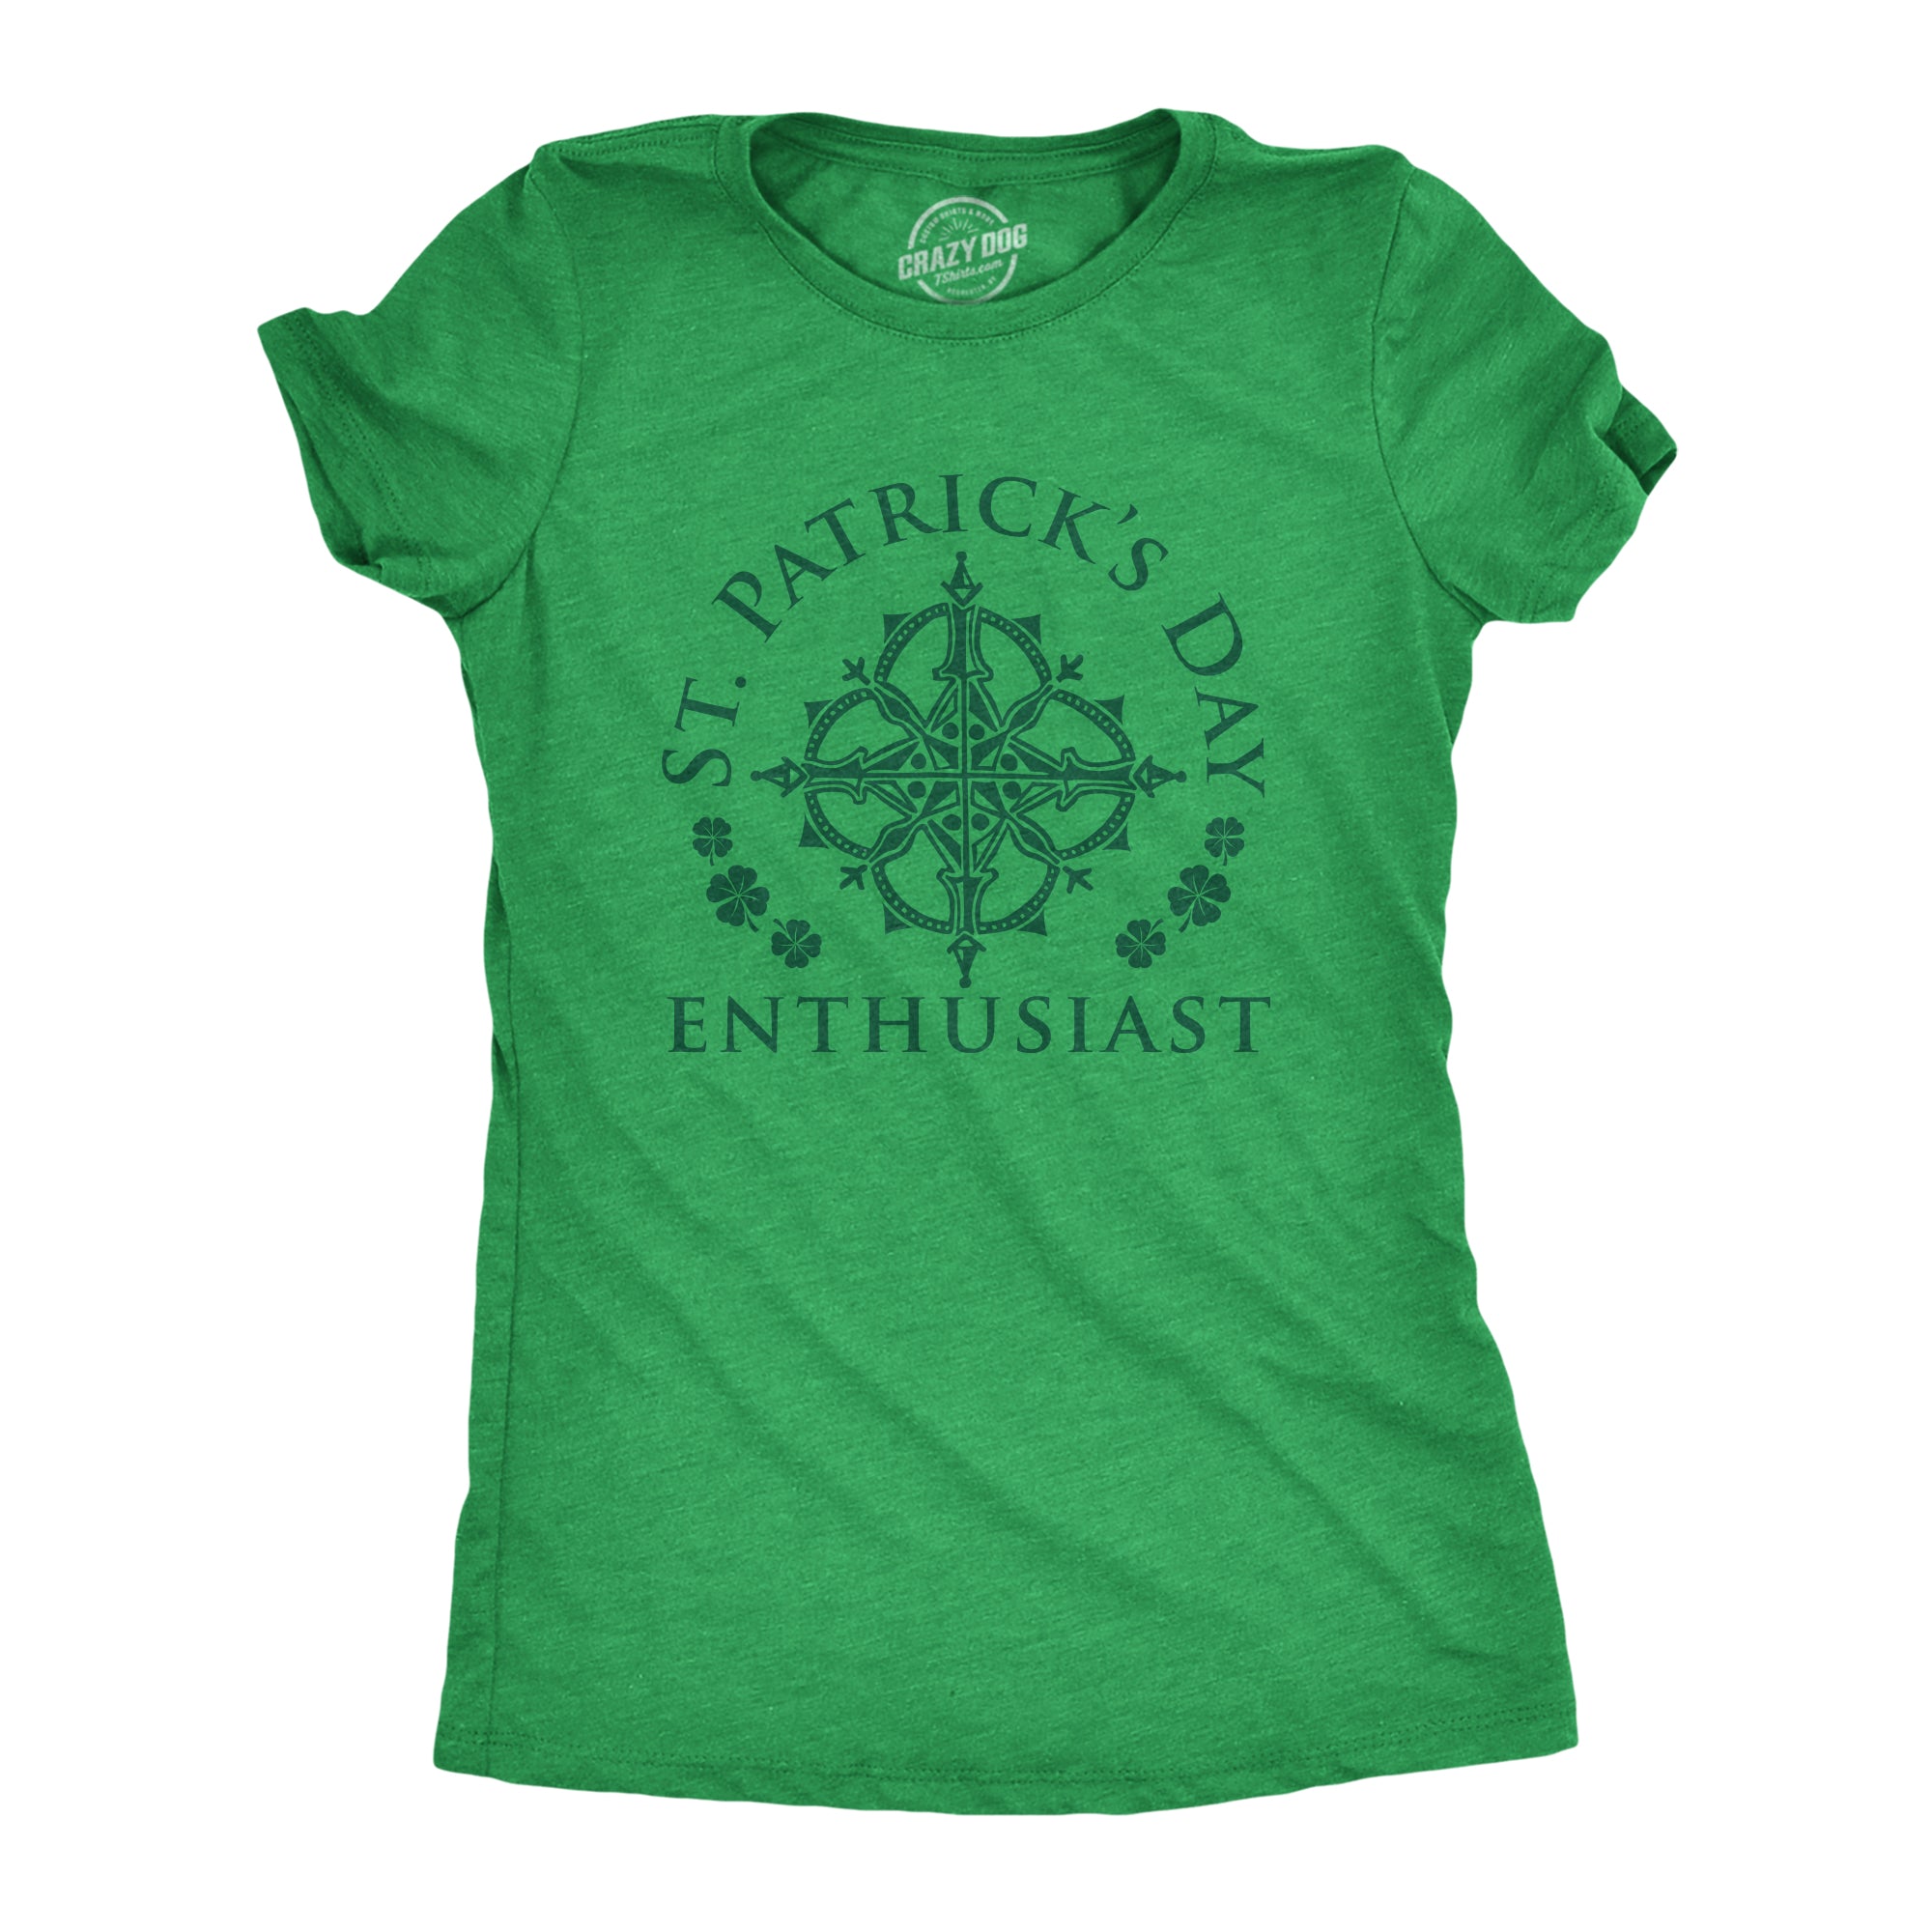 Funny Heather Green St. Patrick's Day Enthusiast Womens T Shirt Nerdy Saint Patrick's Day Tee